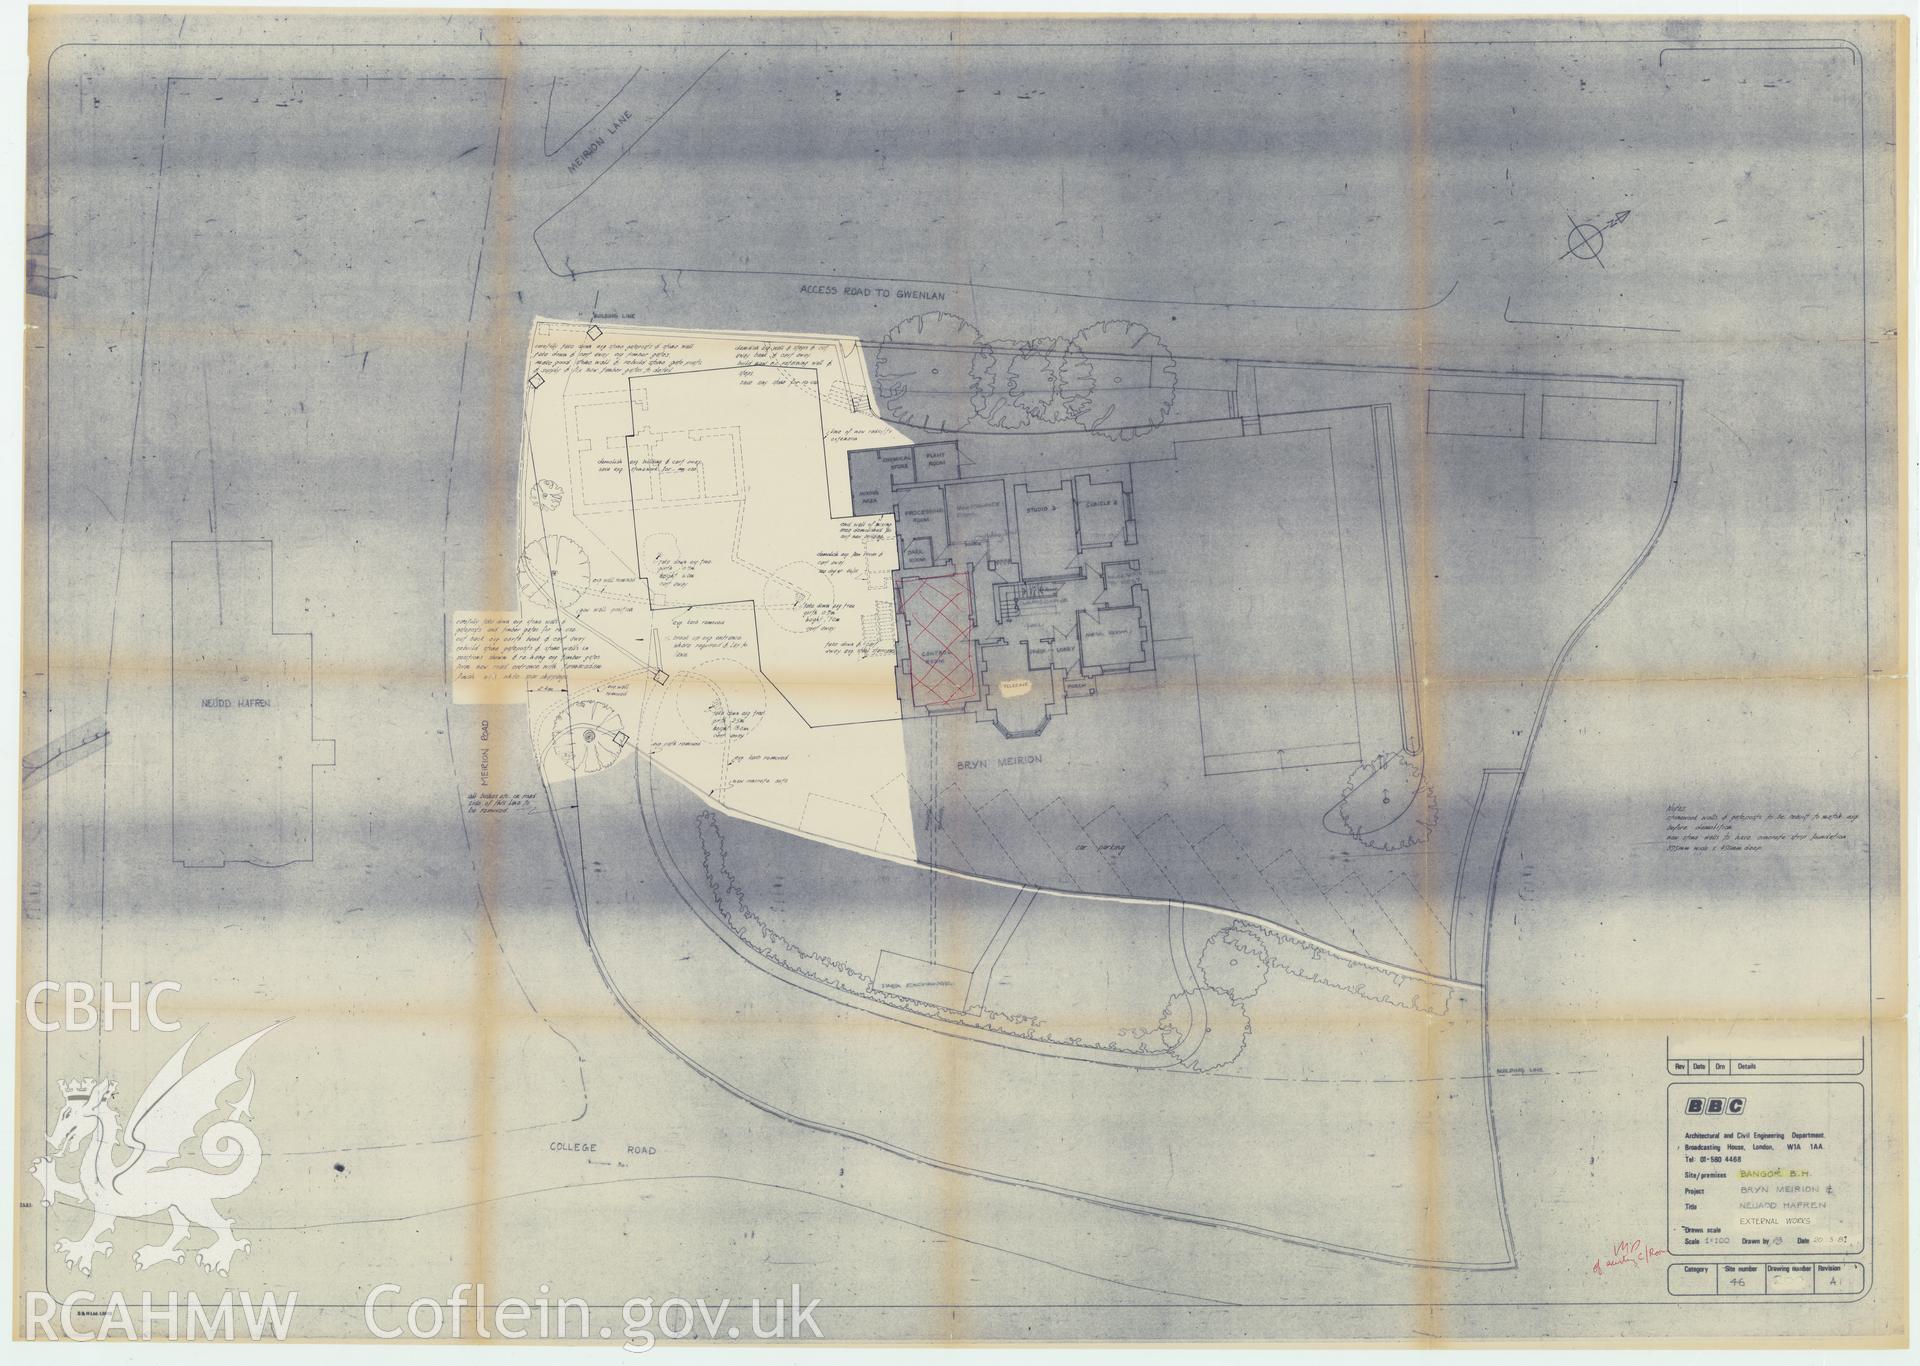 BBC premises, Bryn Meirion Bangor - layout plan drawing of the external works at Neuadd Hafren. Drawing No. 46/200 RevA1, March 1981.